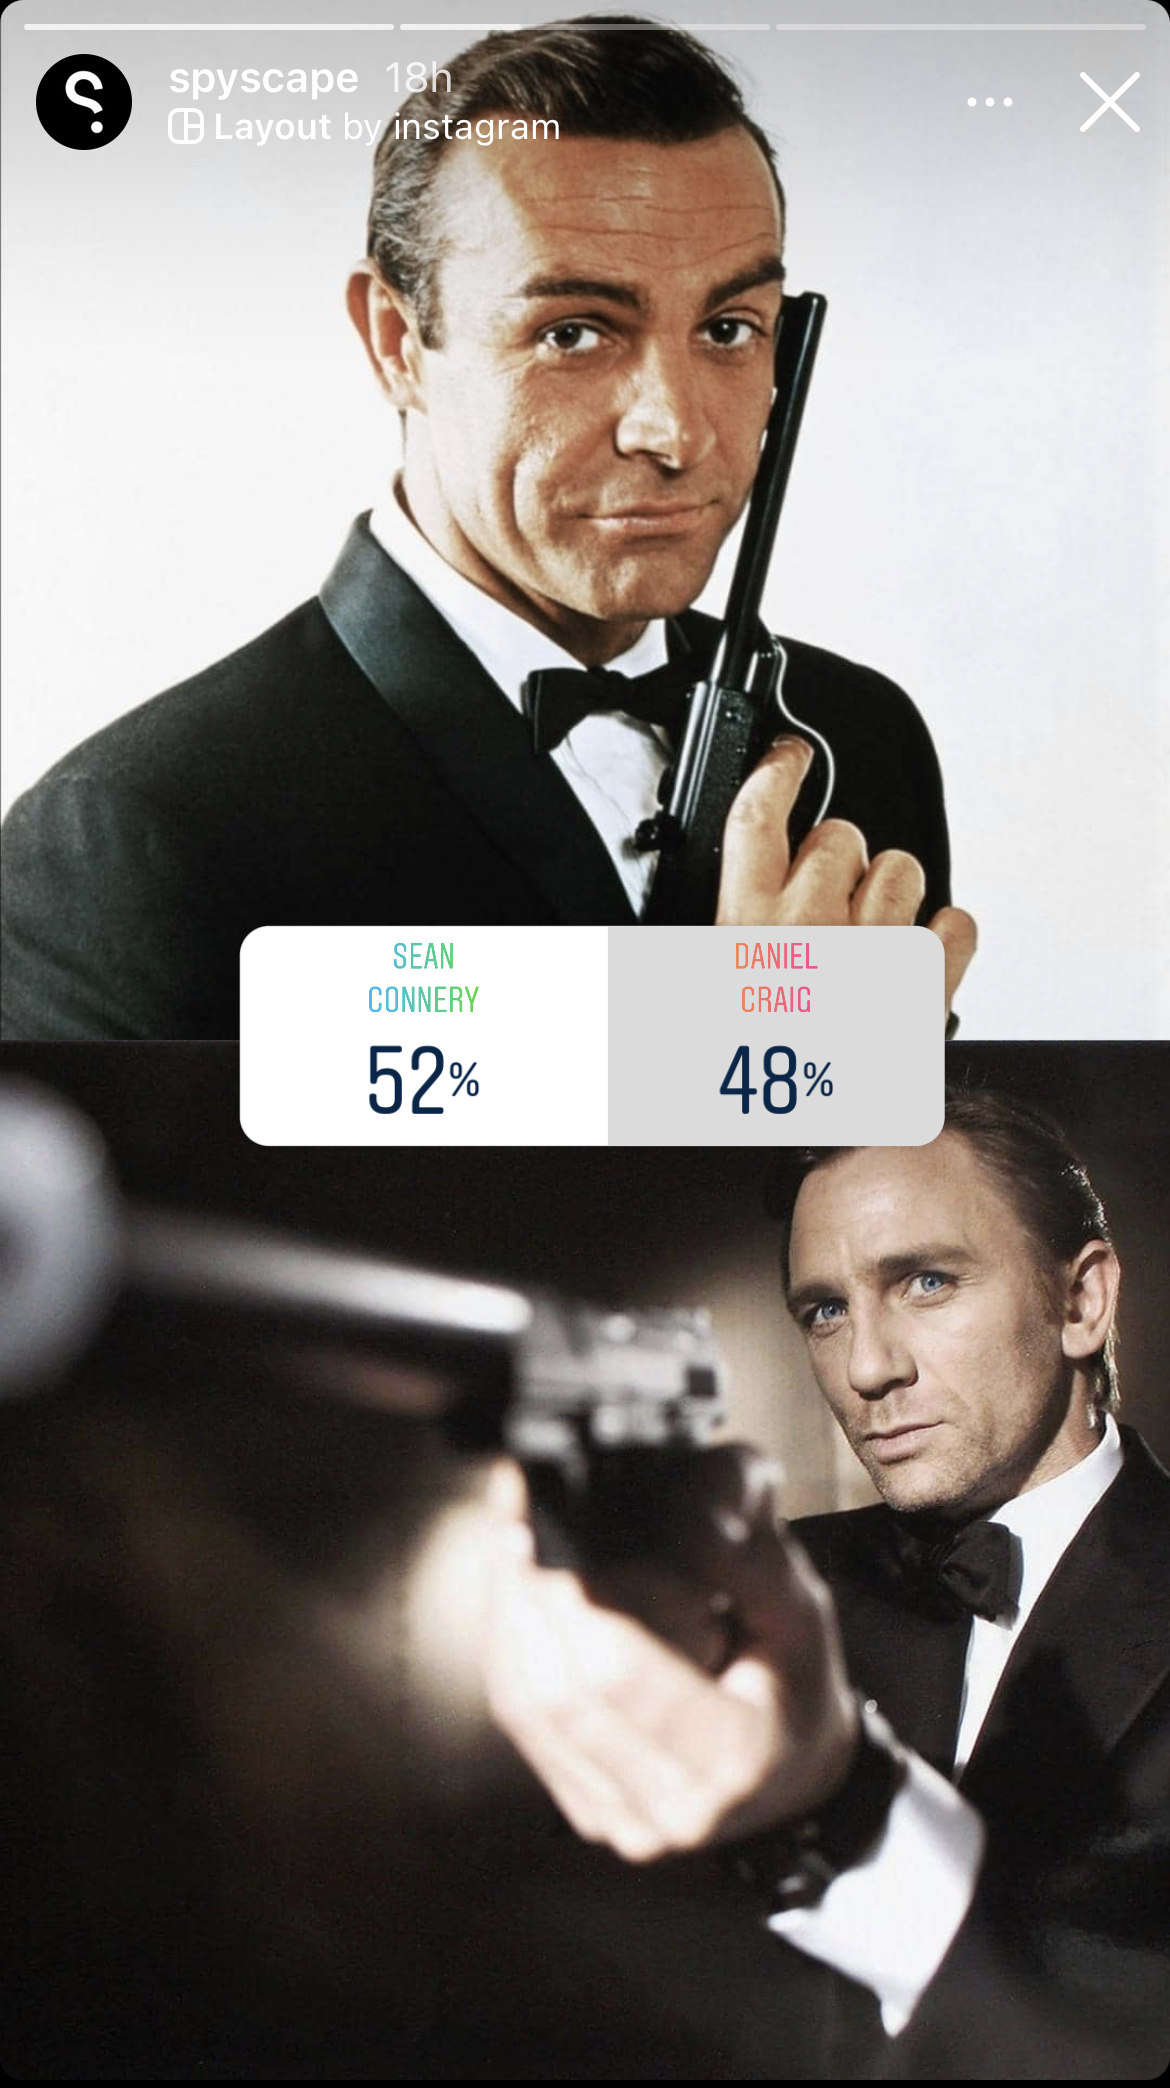 Sean Connery wins vote for the best Bond over Daniel Craig